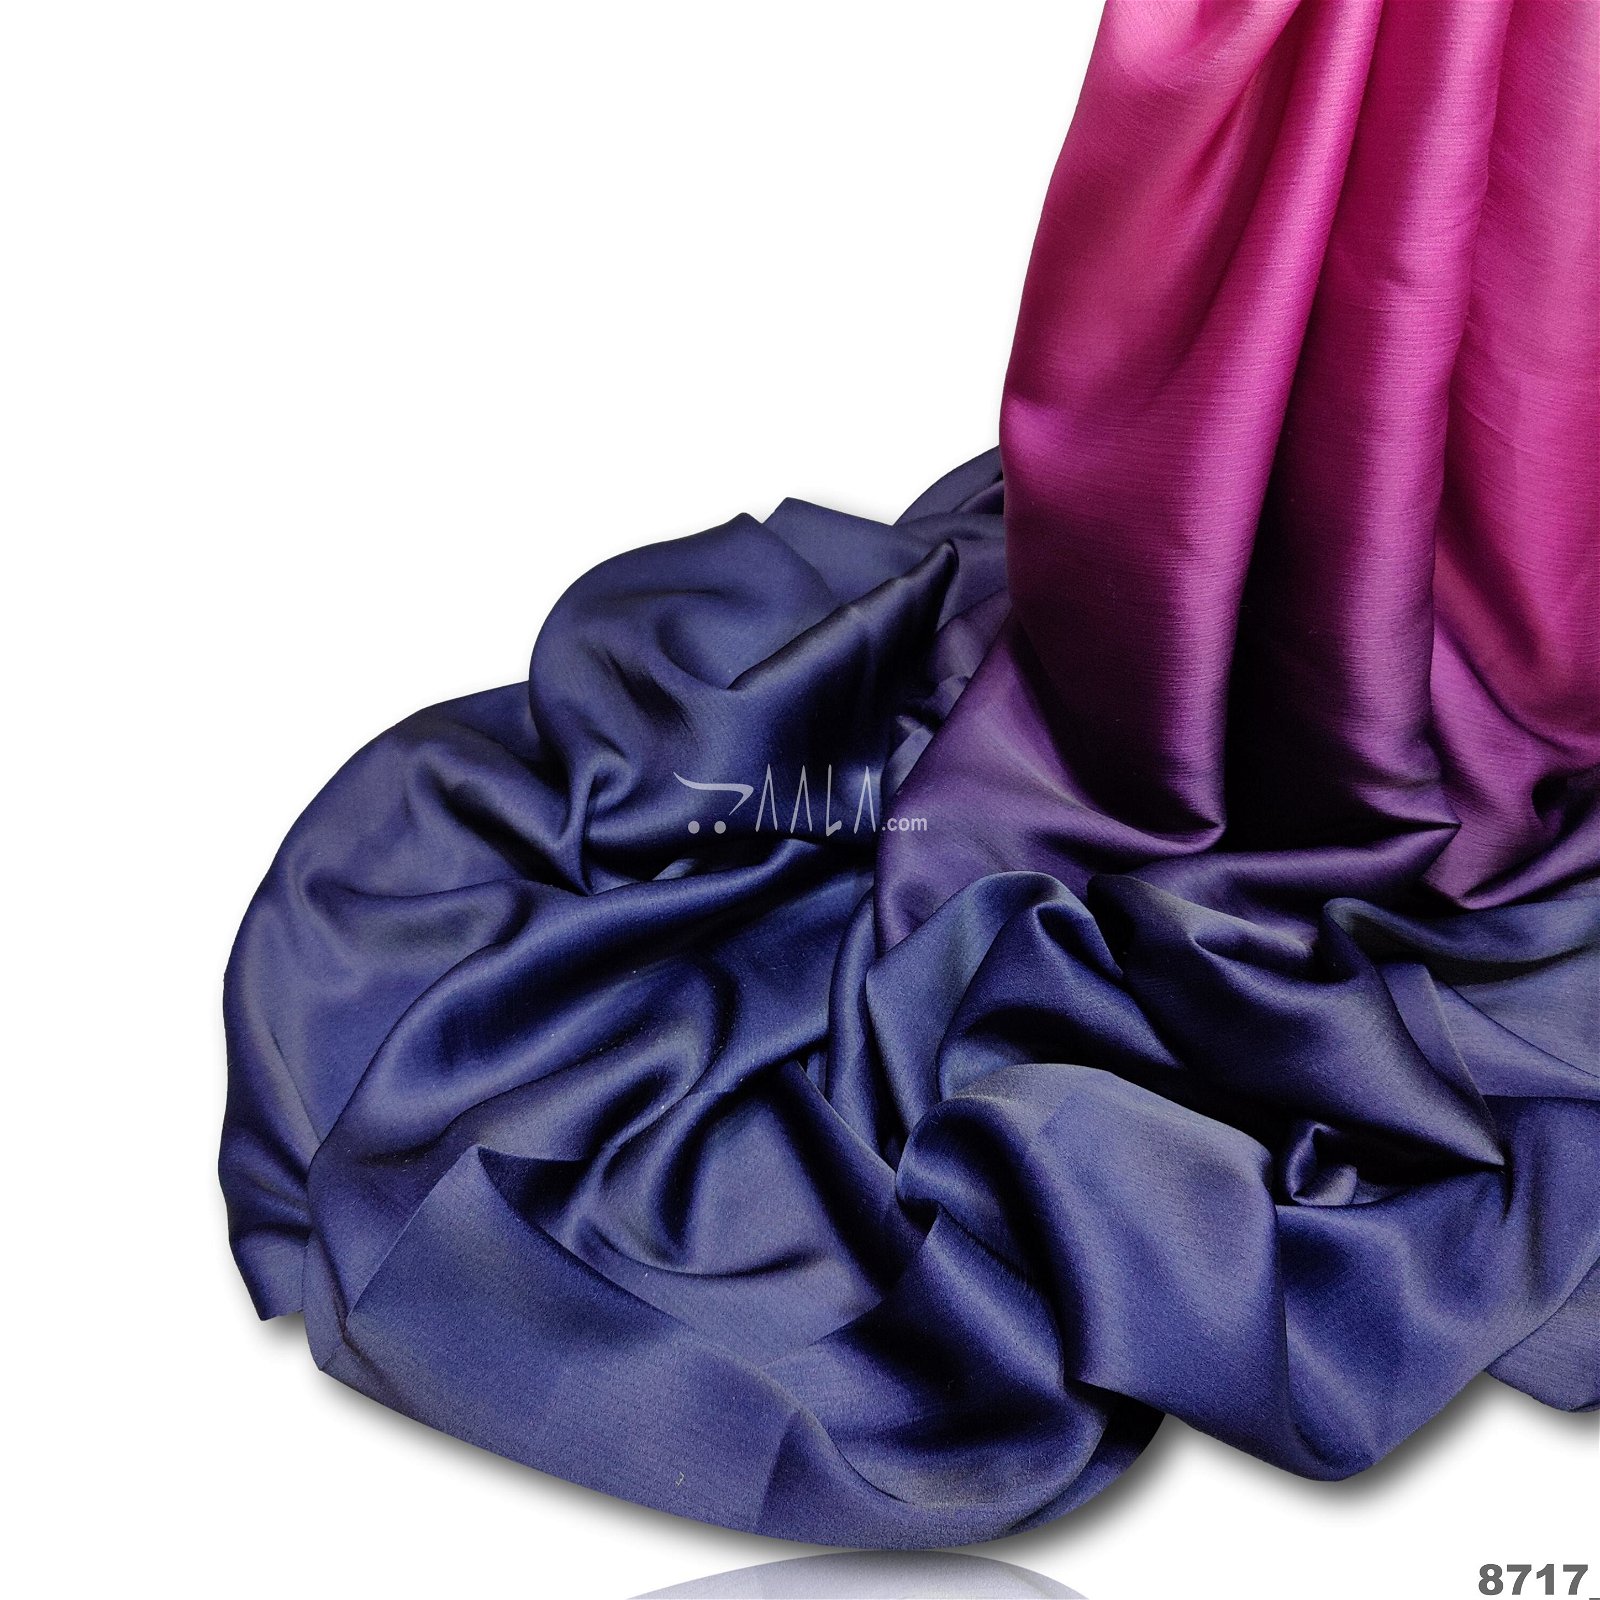 Shaded Satin-Chiffon Poly-ester 44-Inches ASSORTED Per-Metre #8717